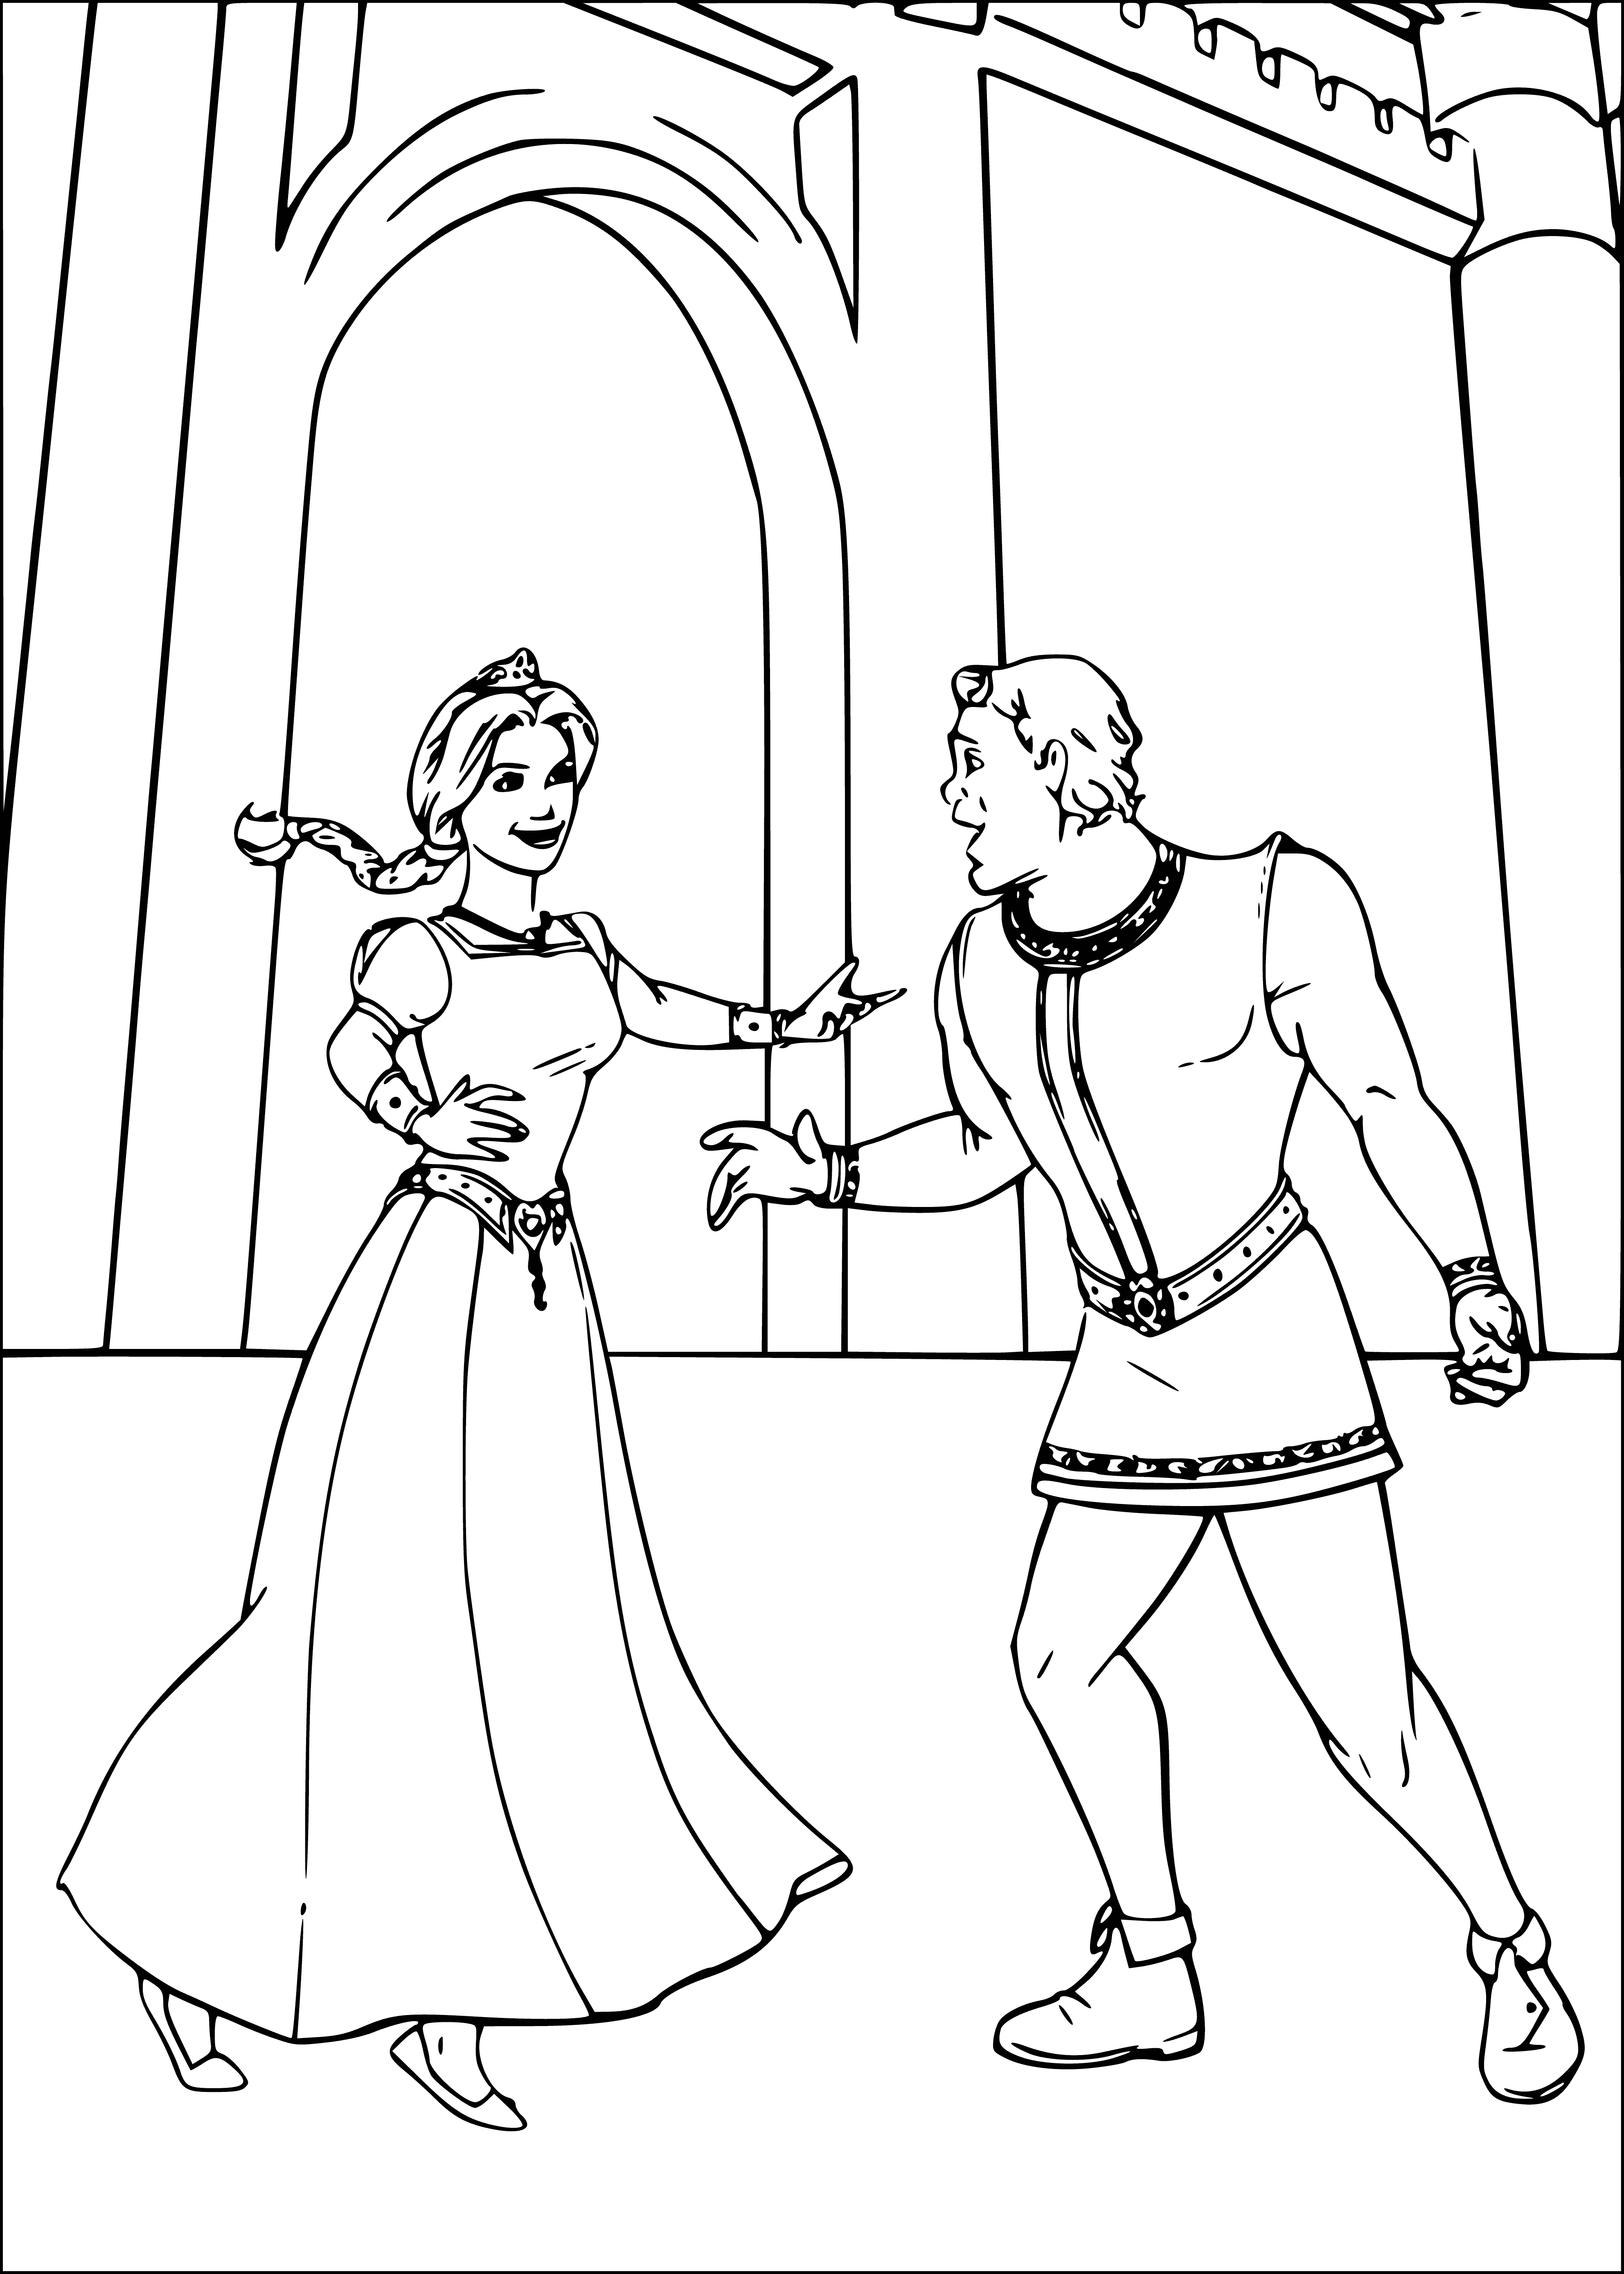 Shrek and Fiona coloring page